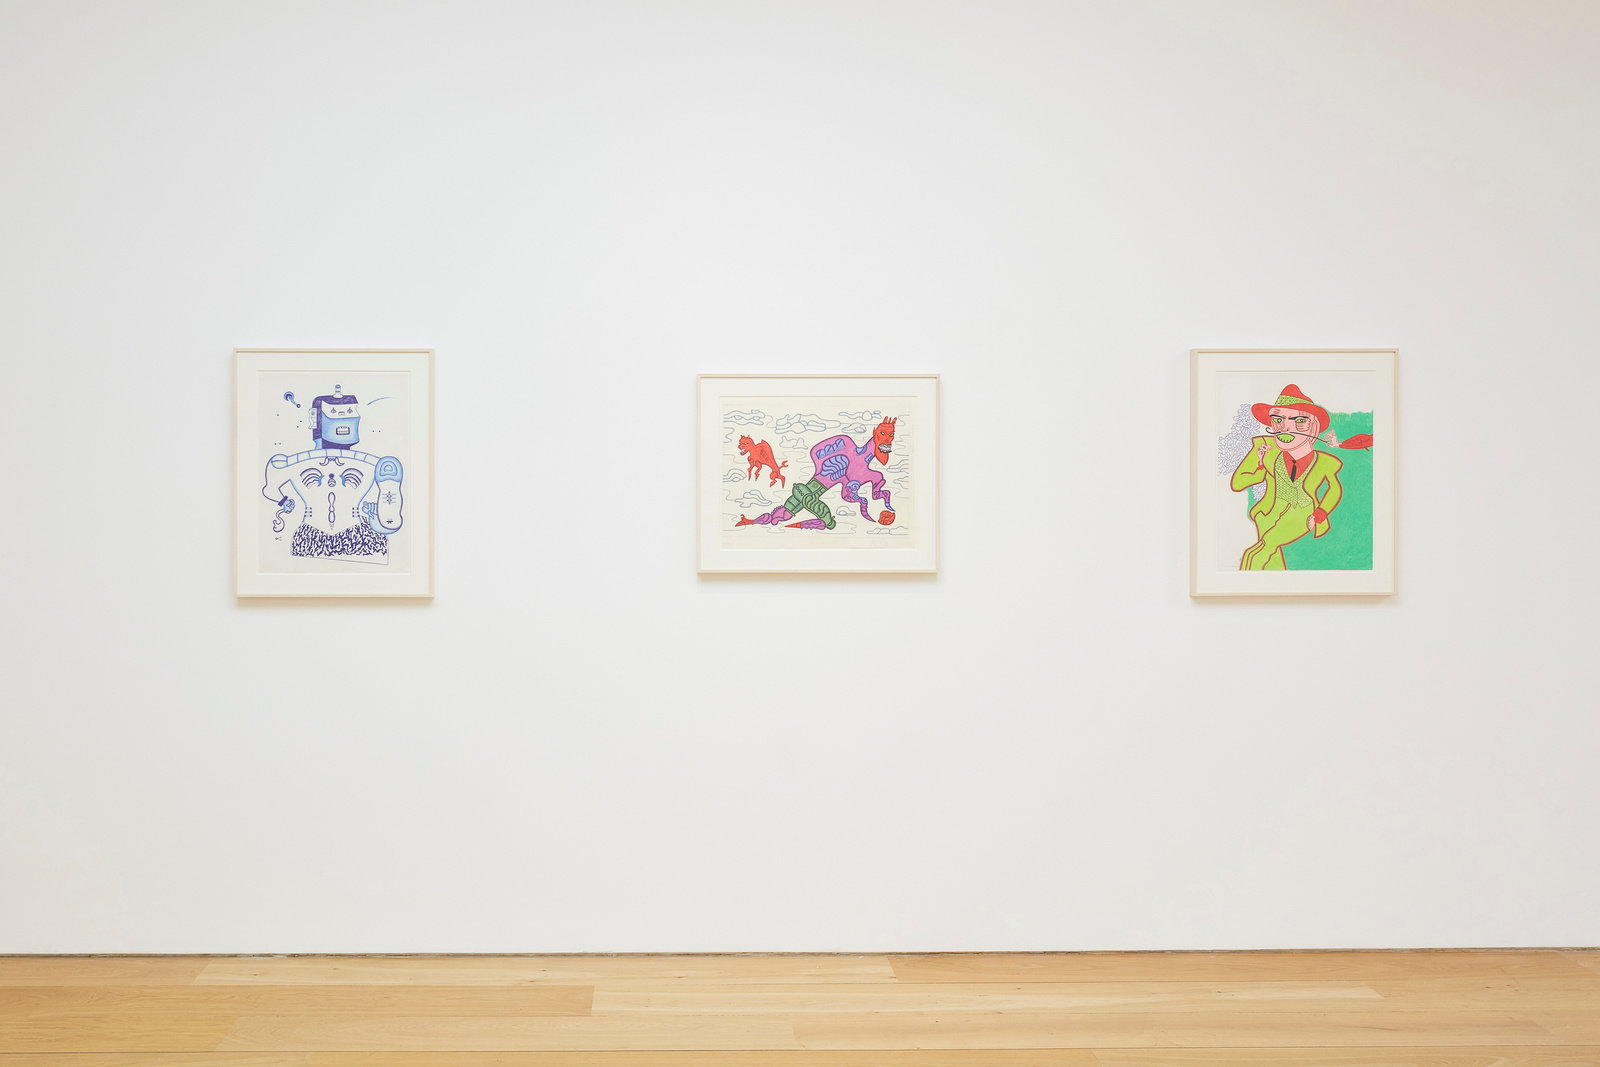 An installation view of three Karl Wirsum framed works on paper hanging on a wall horizontally.